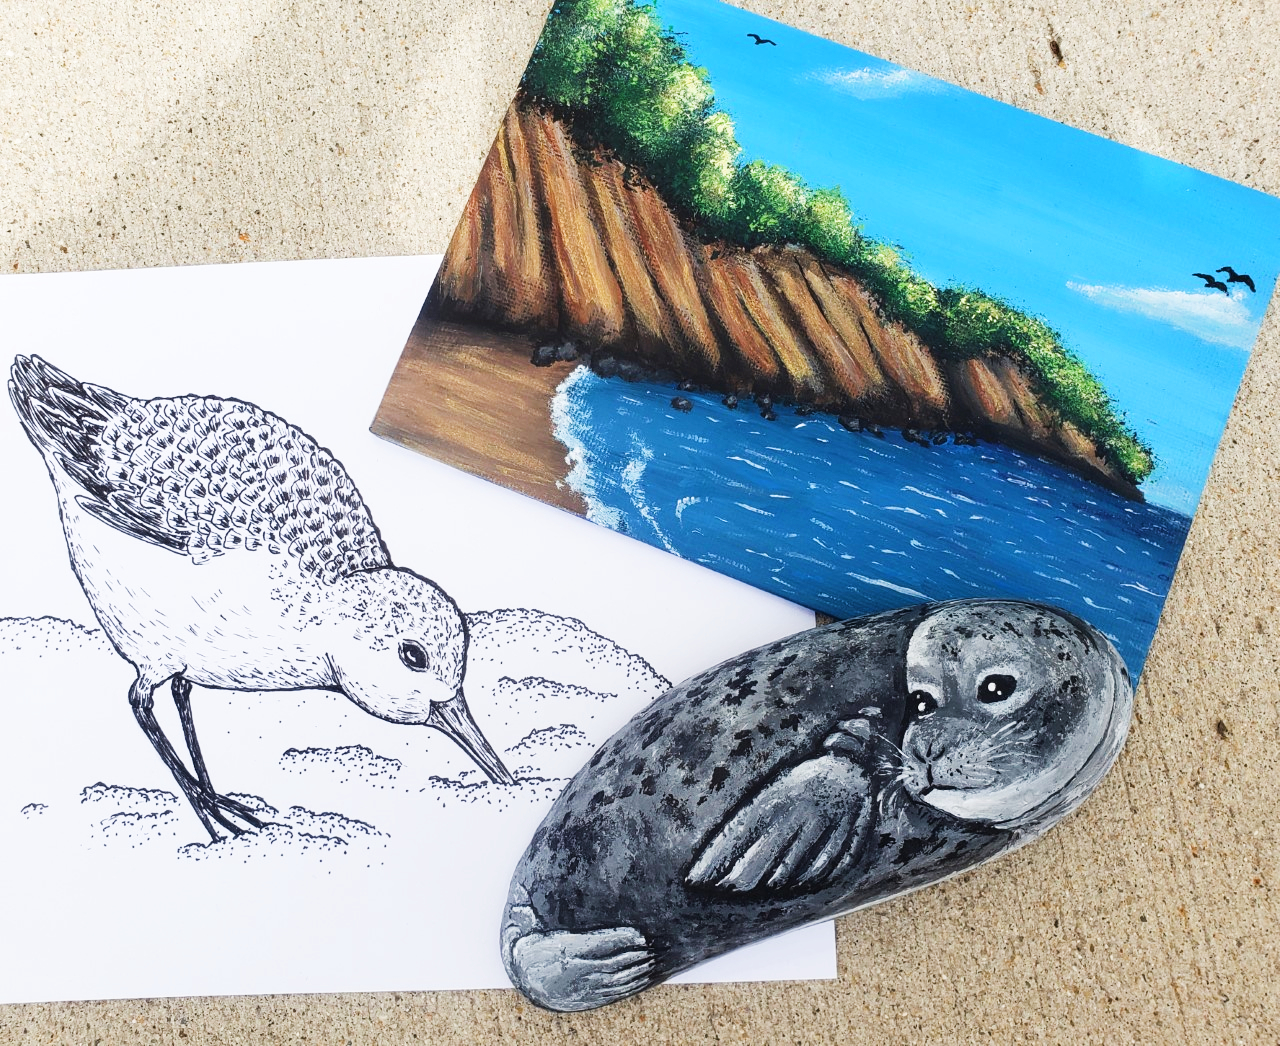 a painting of a beach, a pen drawing of a sanderling (bird) and a rock painted to look like a seal